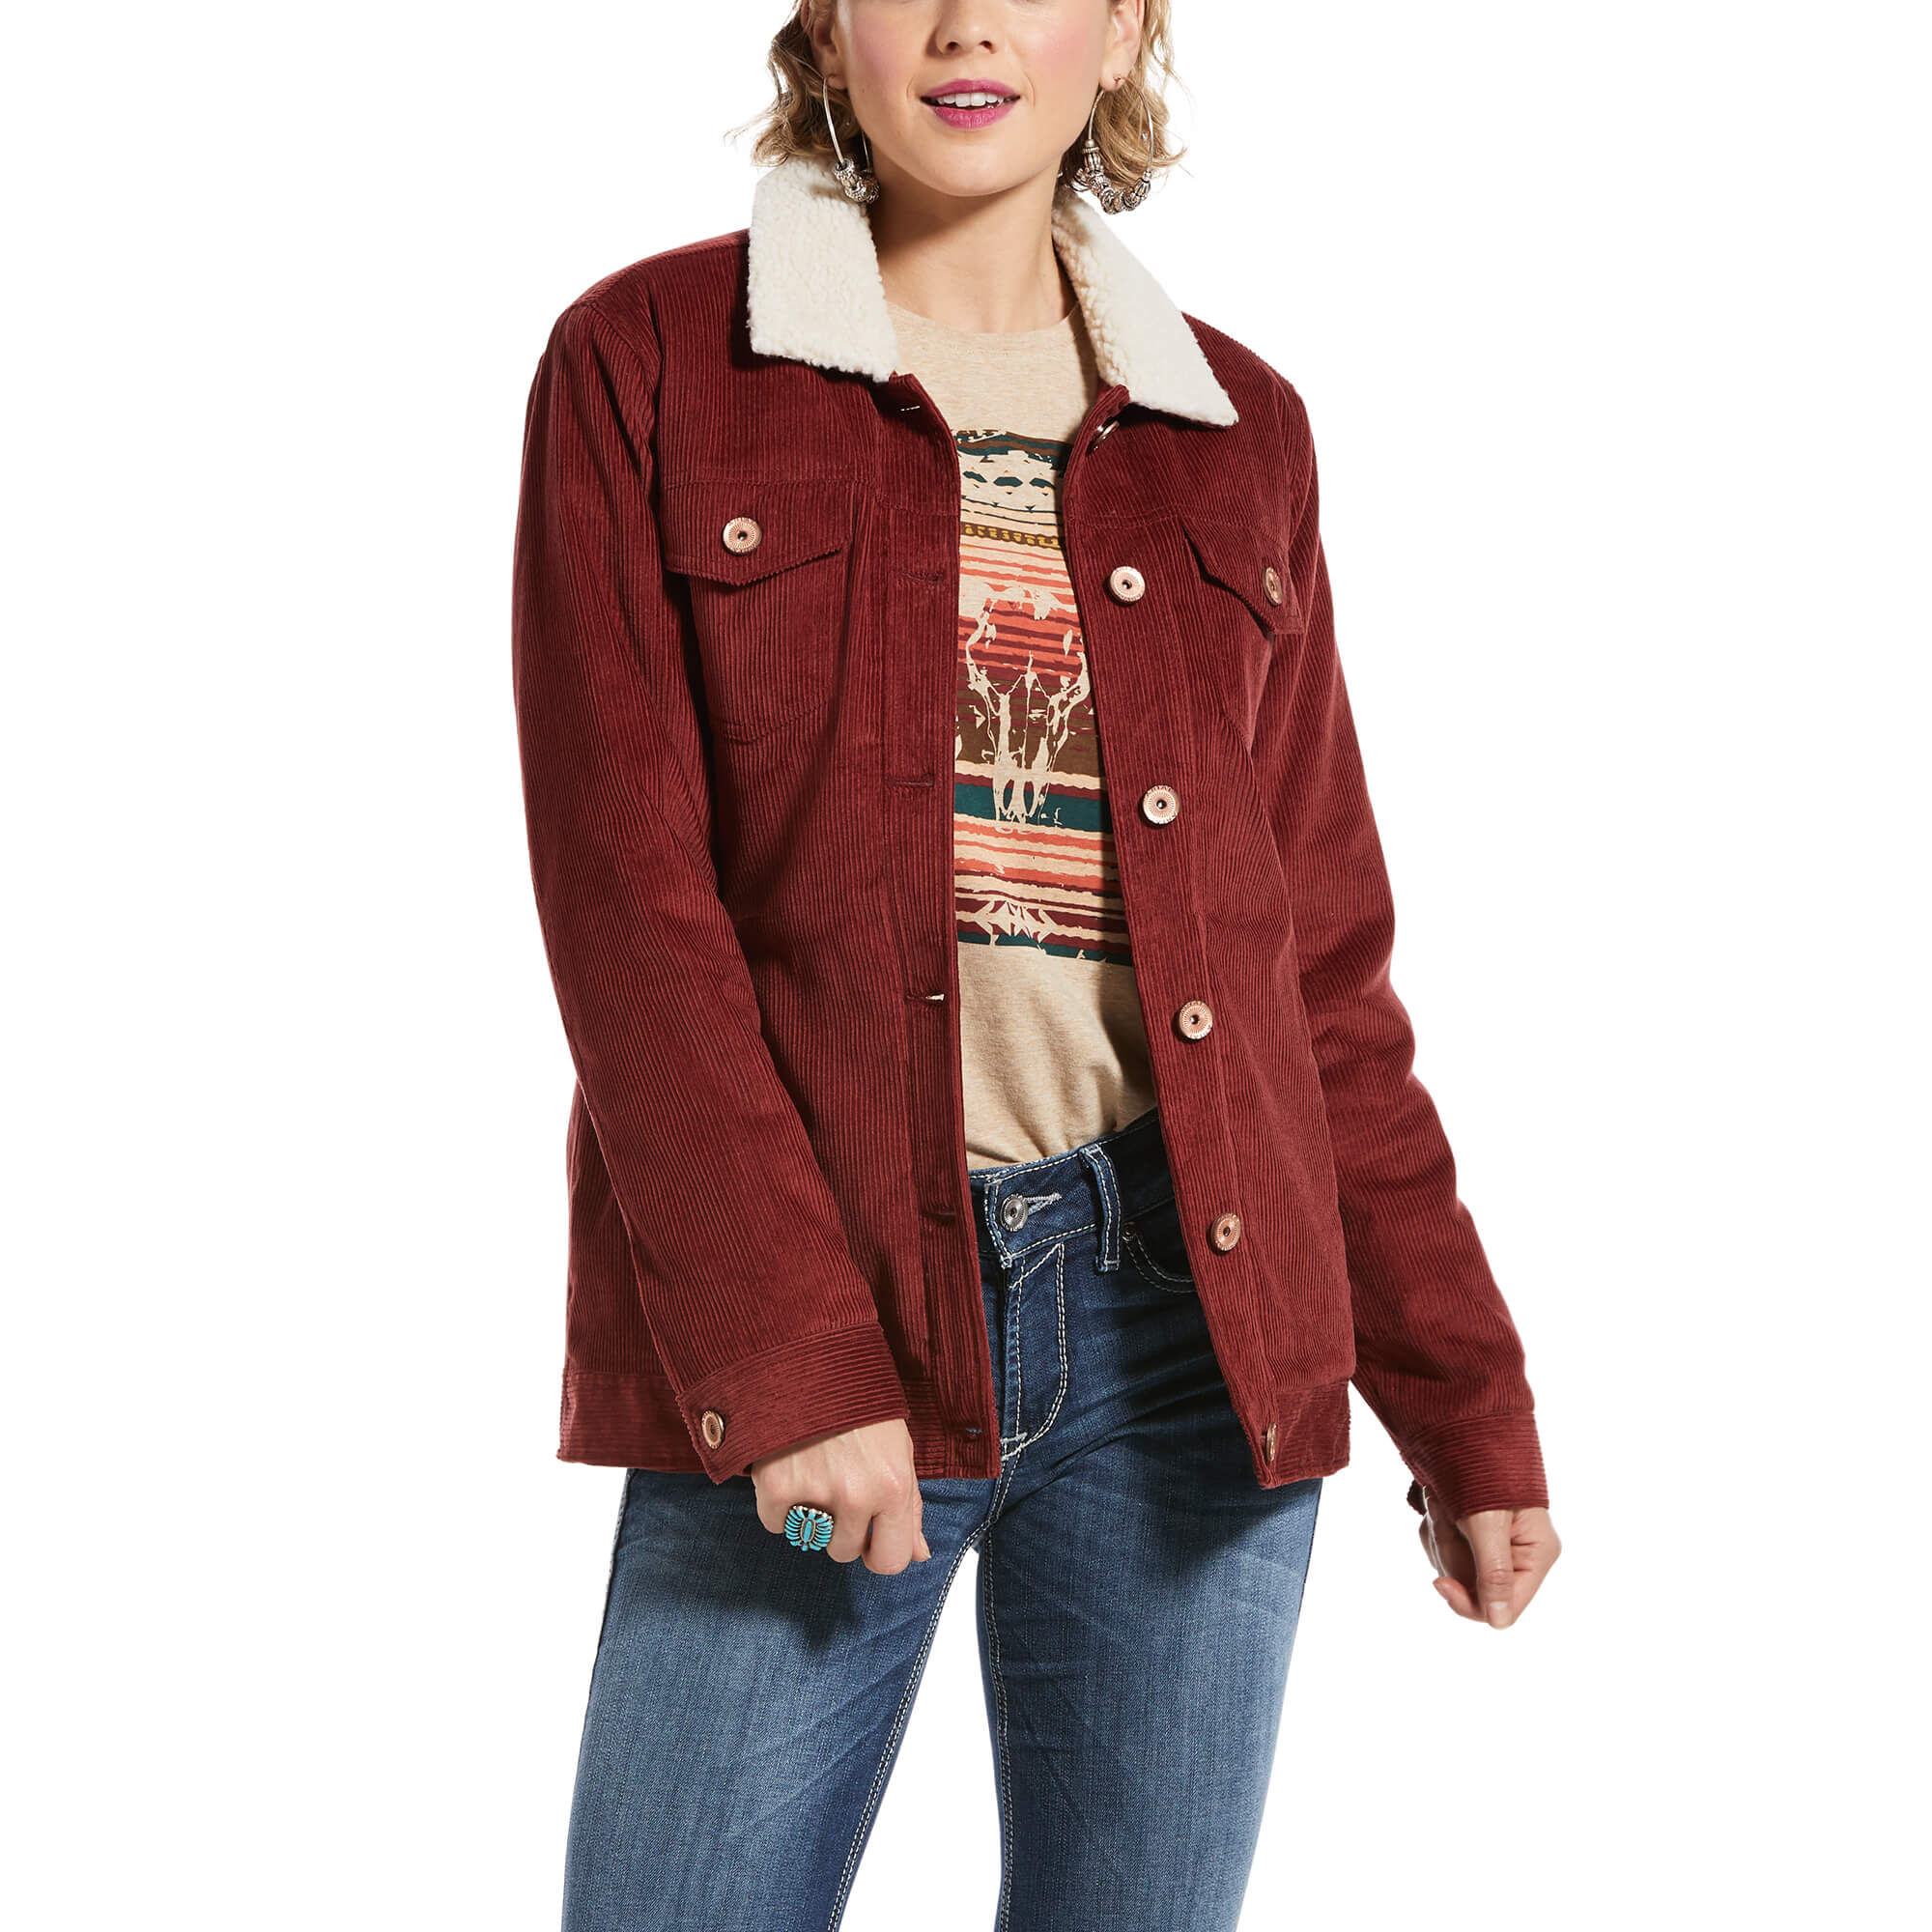 women's western jackets and vests